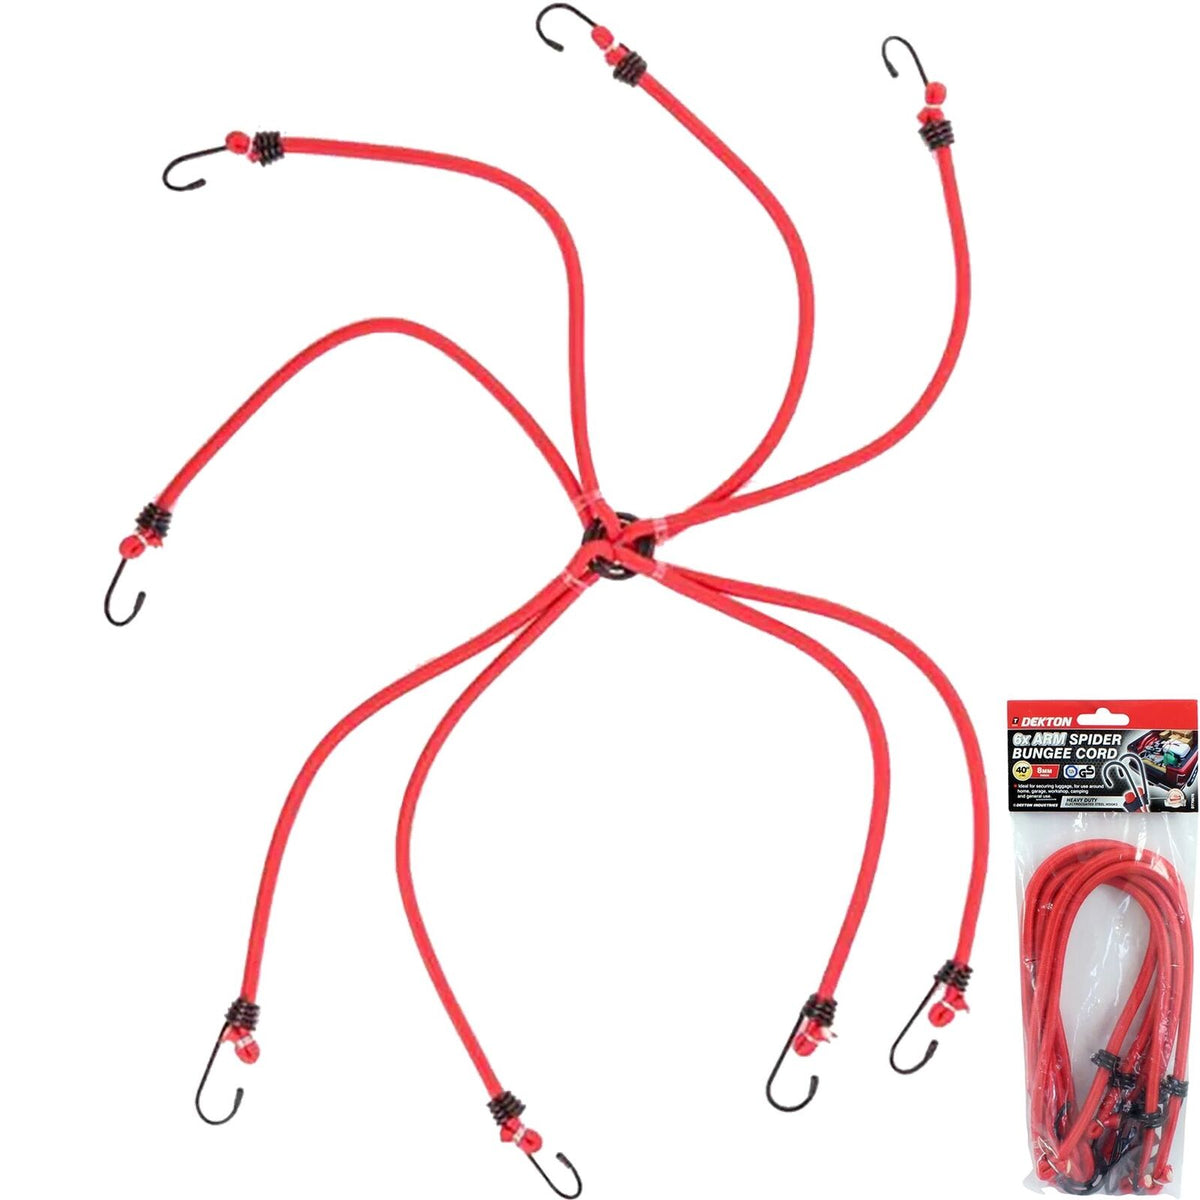 Dekton 6 Arm Spider Elastic Stretch Bungee Cords Hooks Cables Tie Down 8mm 40"